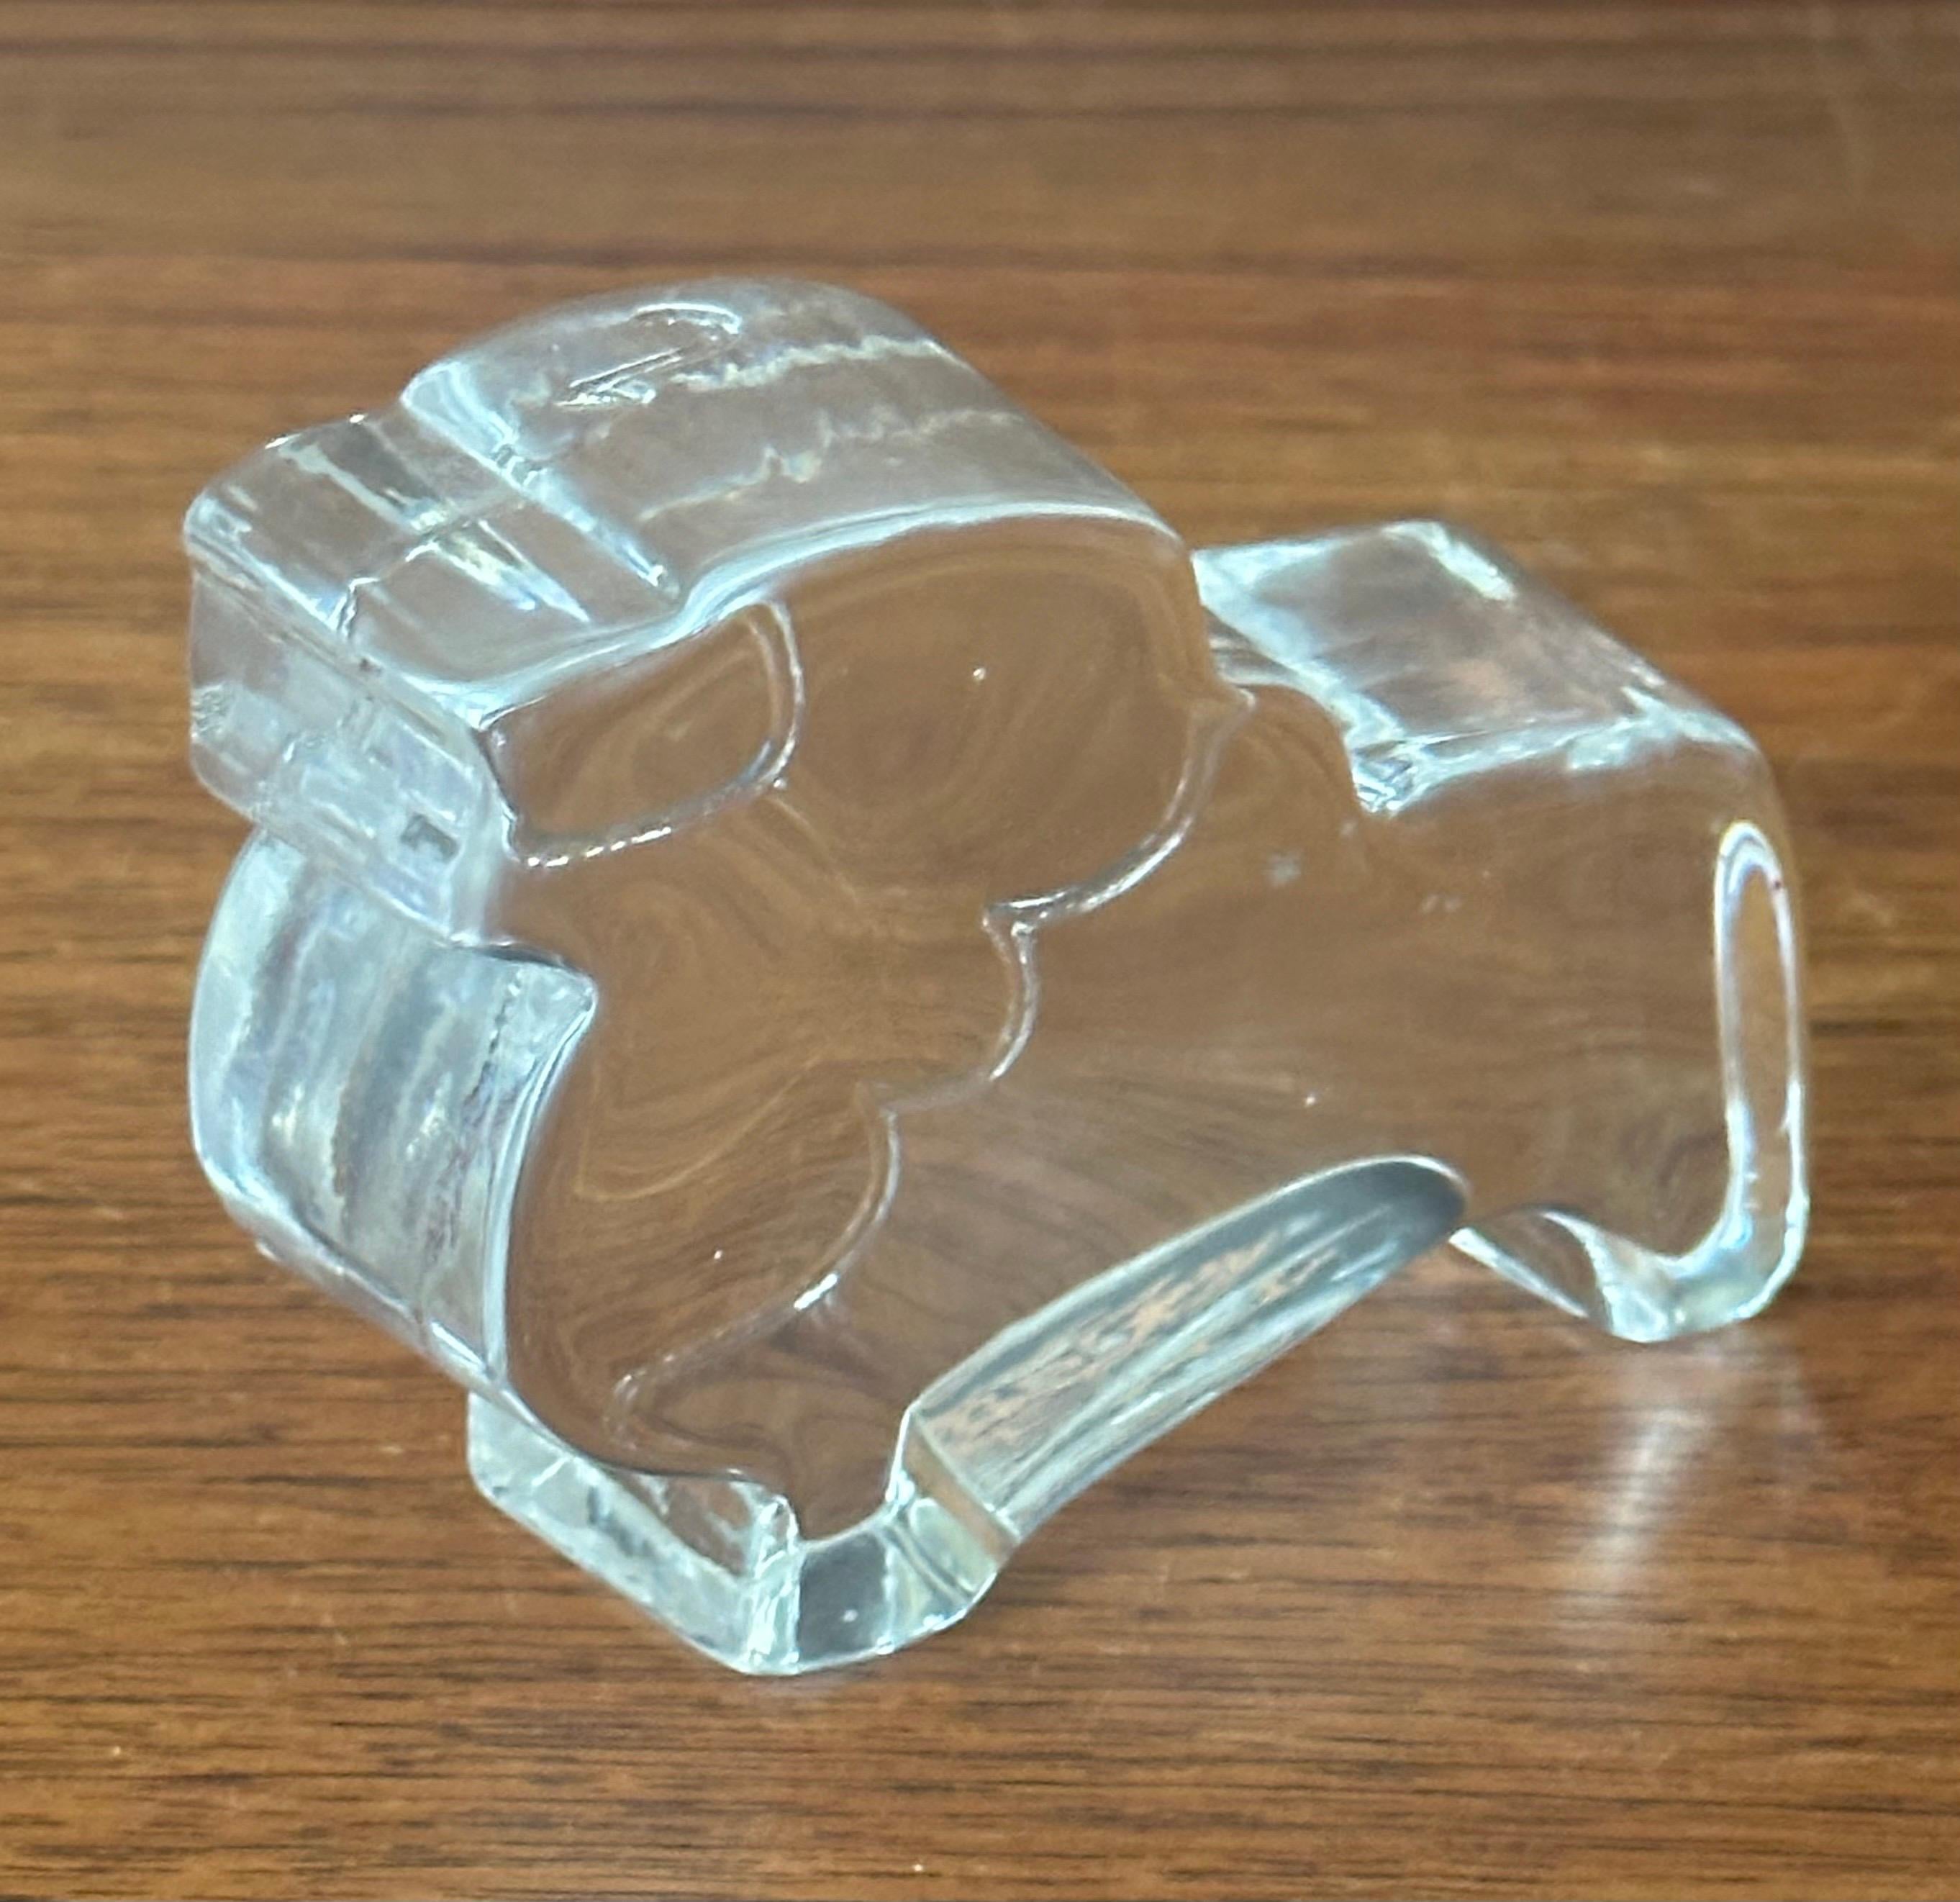 Art Glass Lion Paperweight / Sculpture by Kosta Boda Sweden In Good Condition For Sale In San Diego, CA